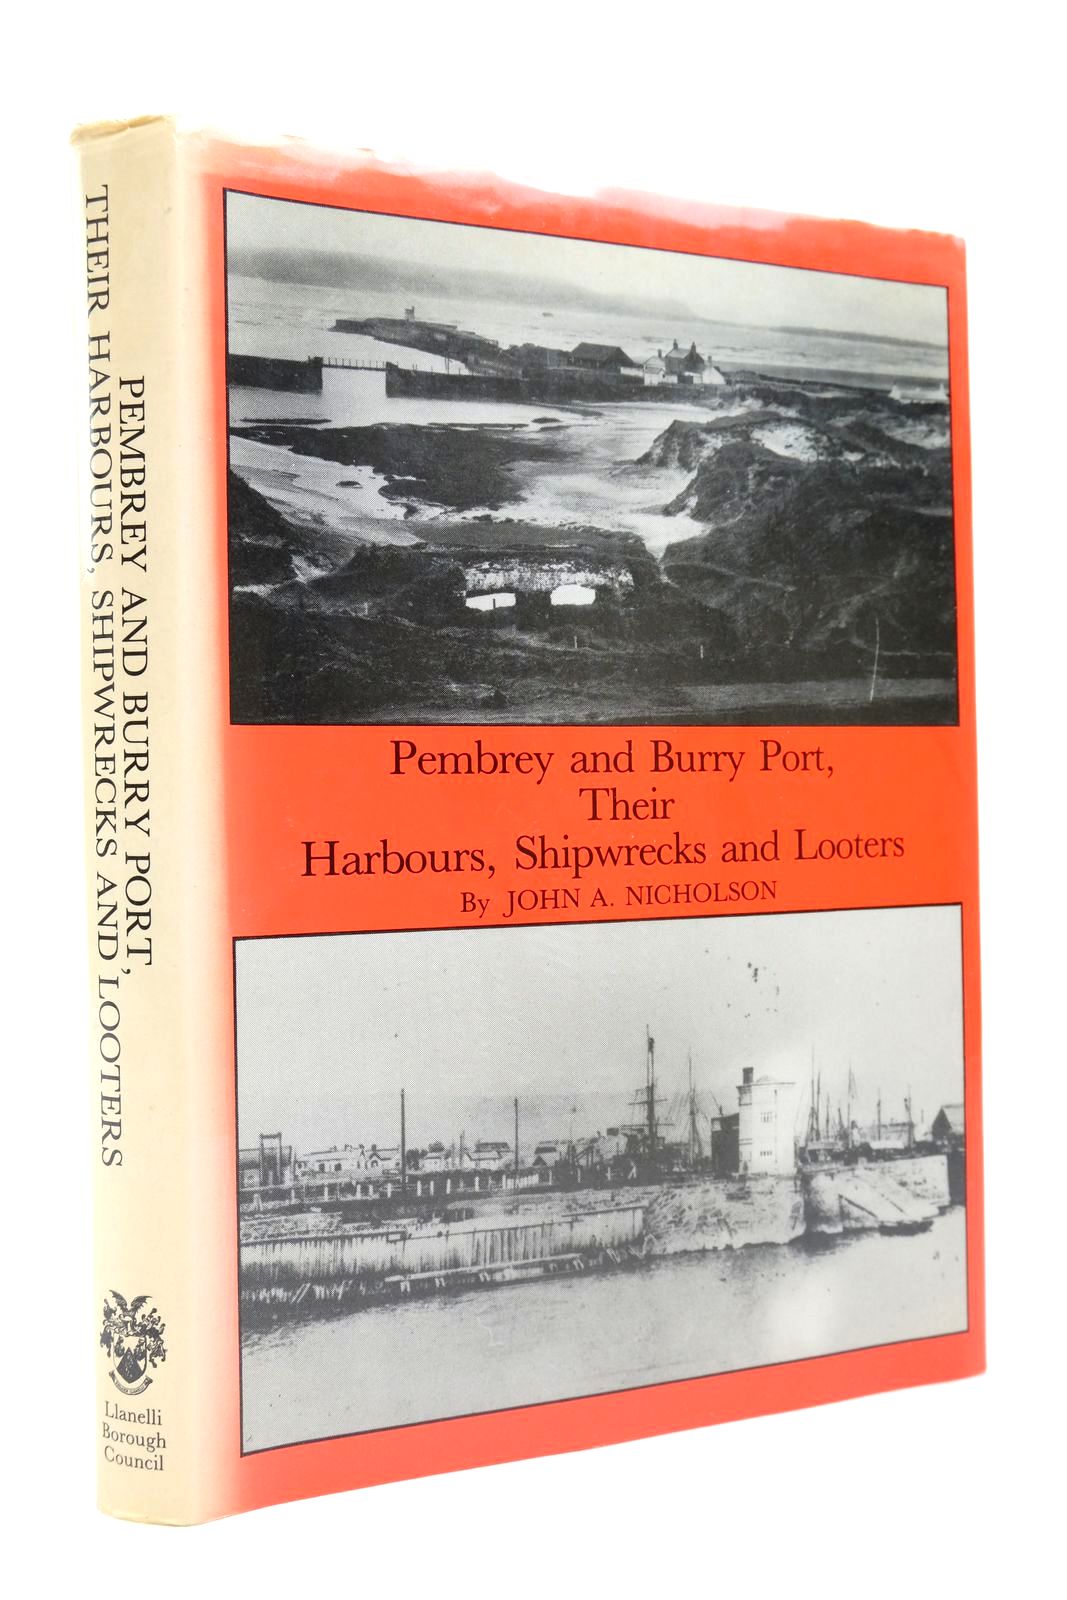 Photo of PEMBREY AND BURRY PORT, THEIR HARBOURS, SHIPWRECKS AND LOOTERS written by Nicholson, John A. published by Lanelli Borough Council (STOCK CODE: 2140786)  for sale by Stella & Rose's Books